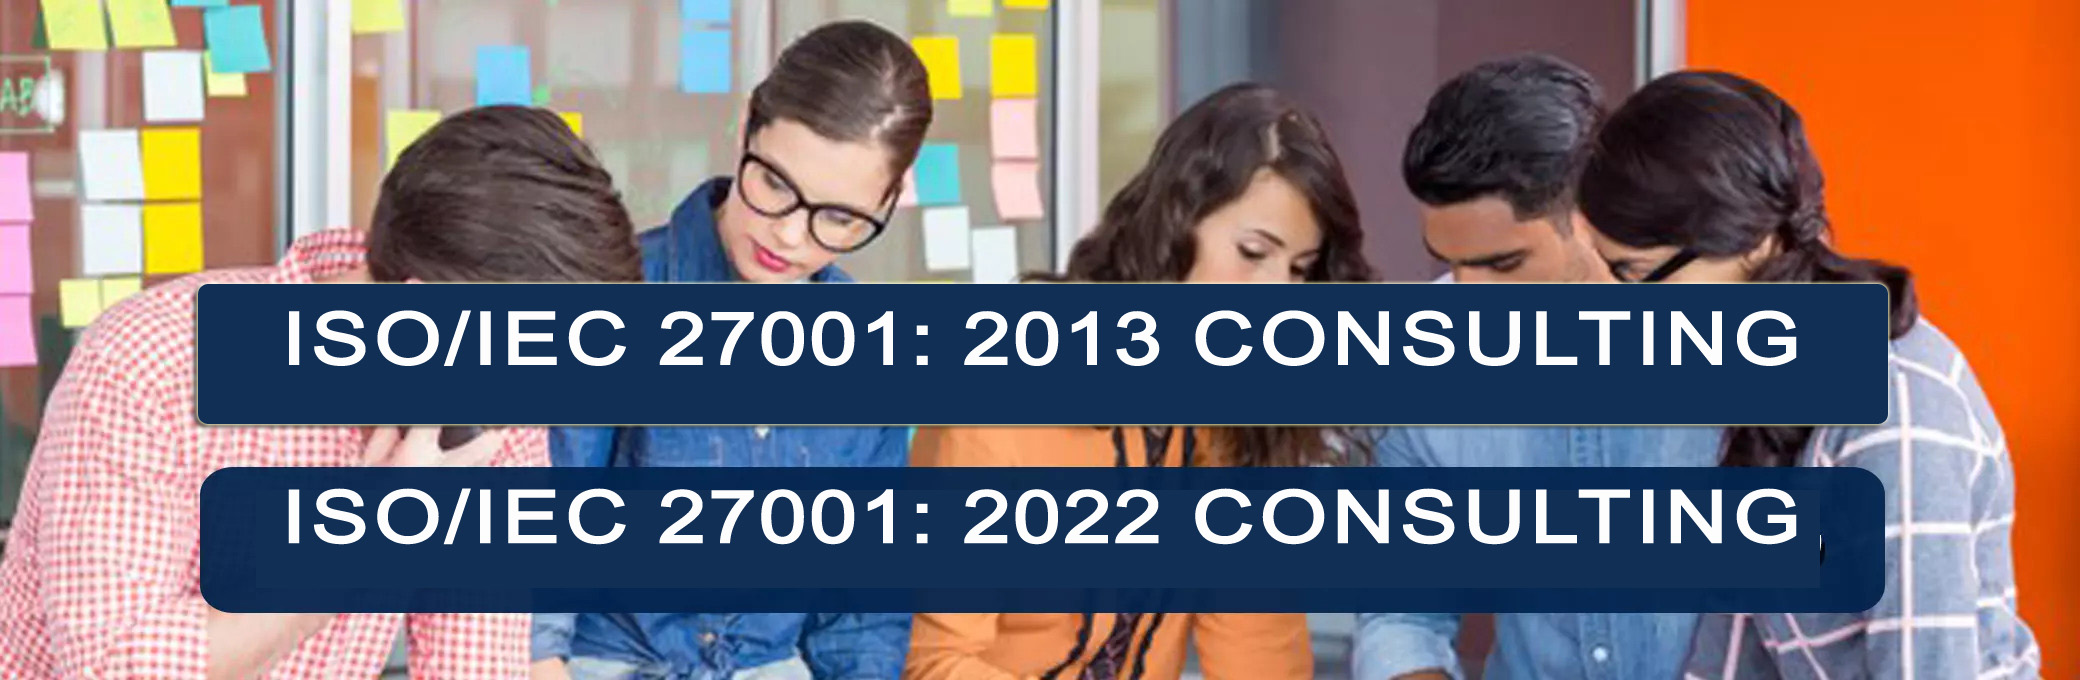 ISO-IEC-27001-2013-Consulting